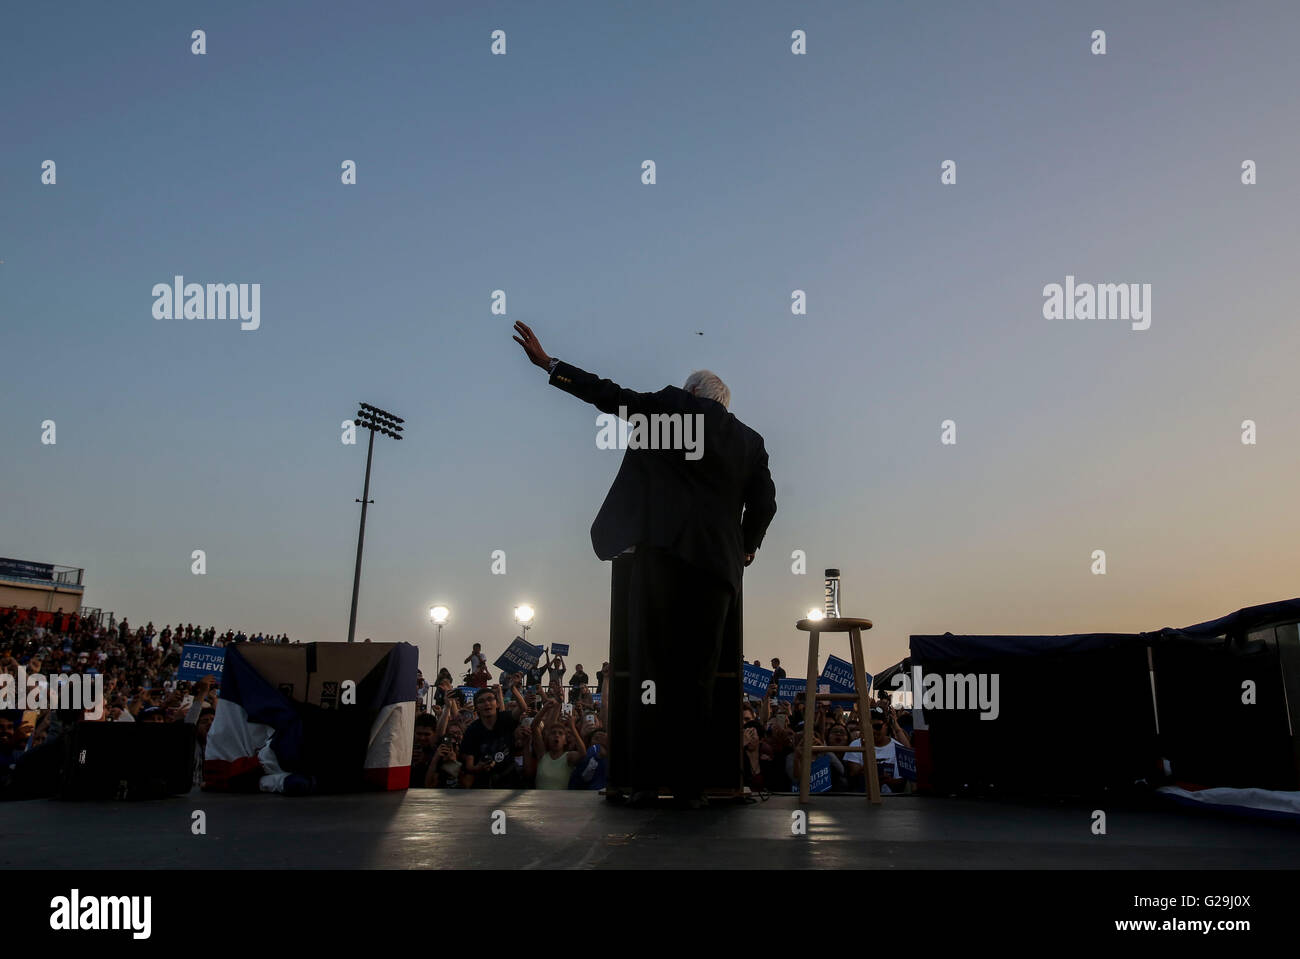 Pomona, California, USA. 26th May, 2016. U.S. Democratic presidential candidate Bernie Sanders speaks during a campaign rally in Pomona, U.S. state of California, May 26, 2016. Credit:  Xinhua/Alamy Live News Stock Photo